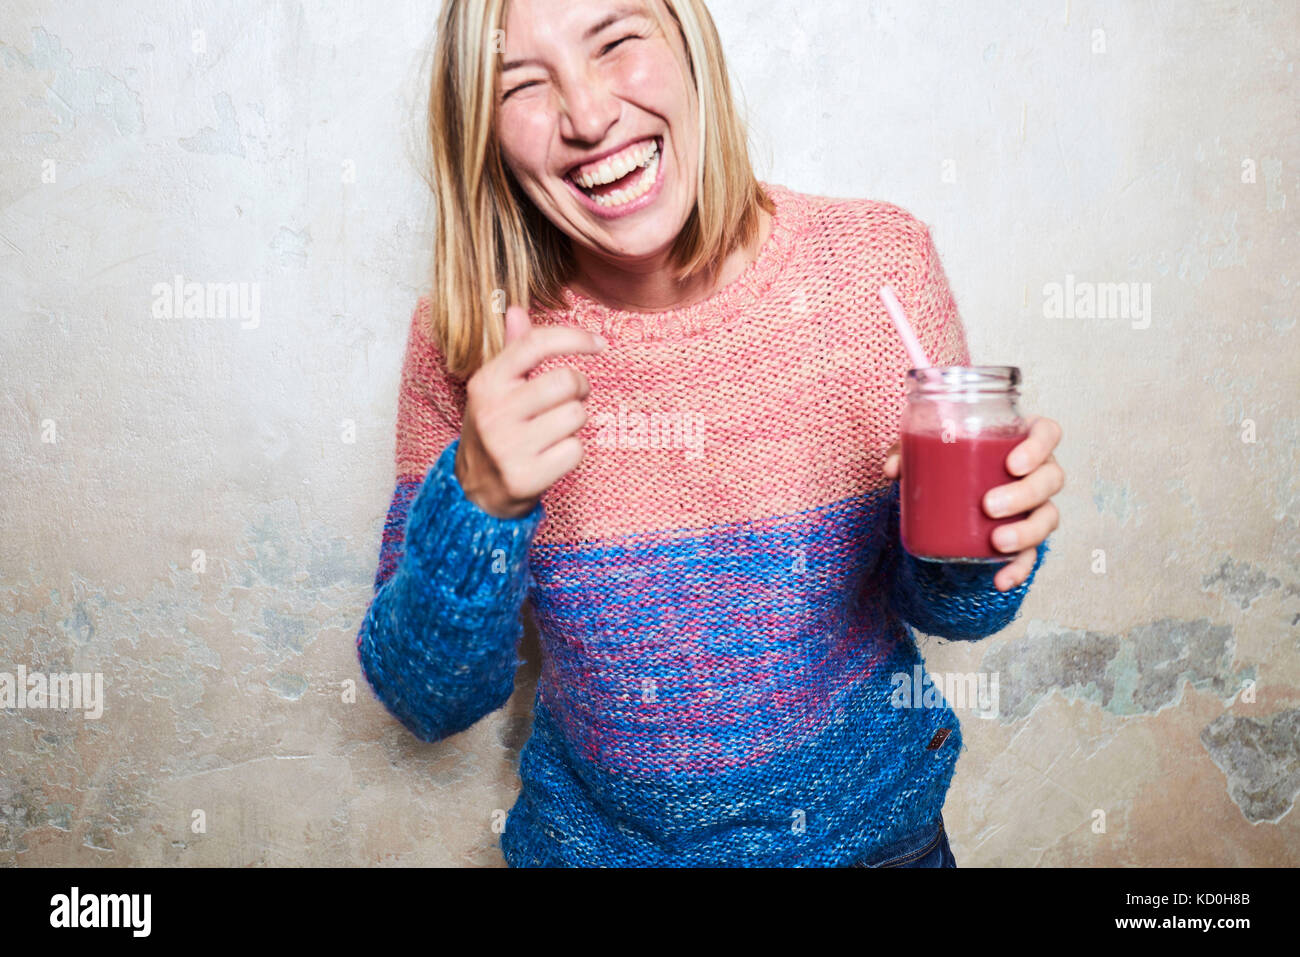 Portrait of woman holding smoothie, laughing Stock Photo